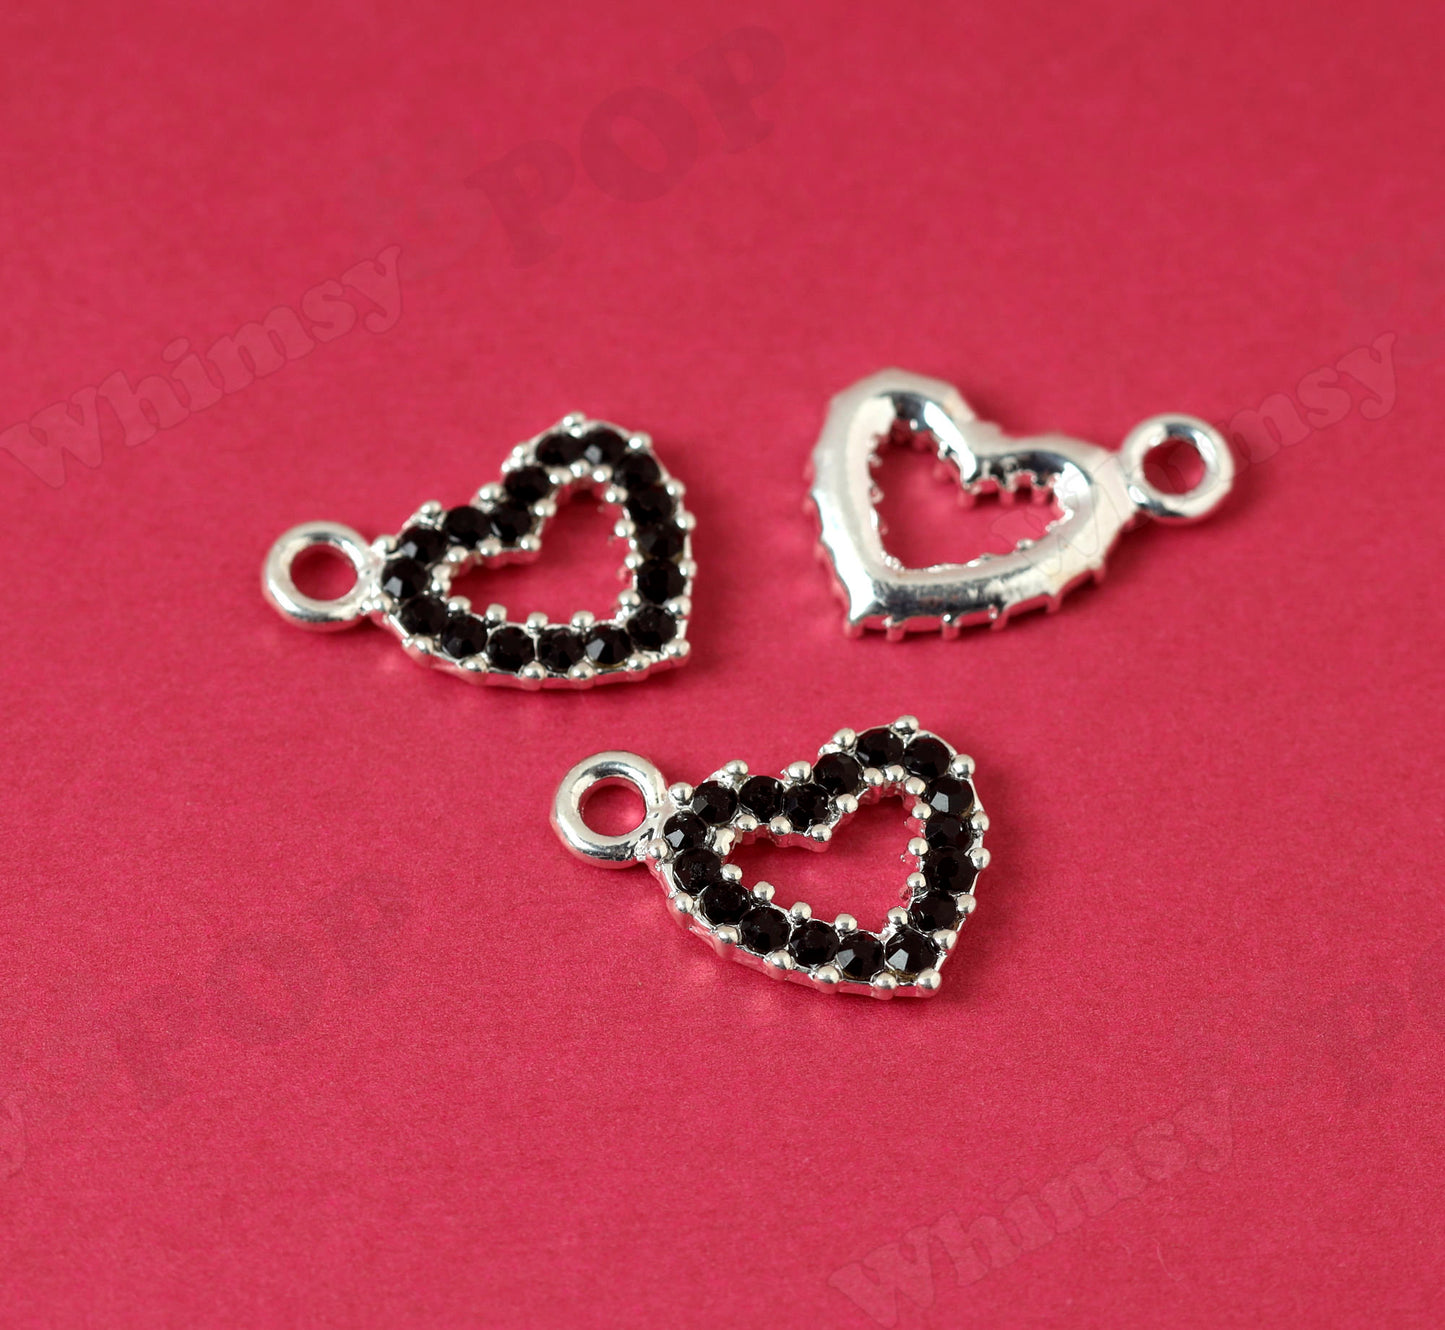 Black Heart Charms in Many Colors for DIY Jewelry